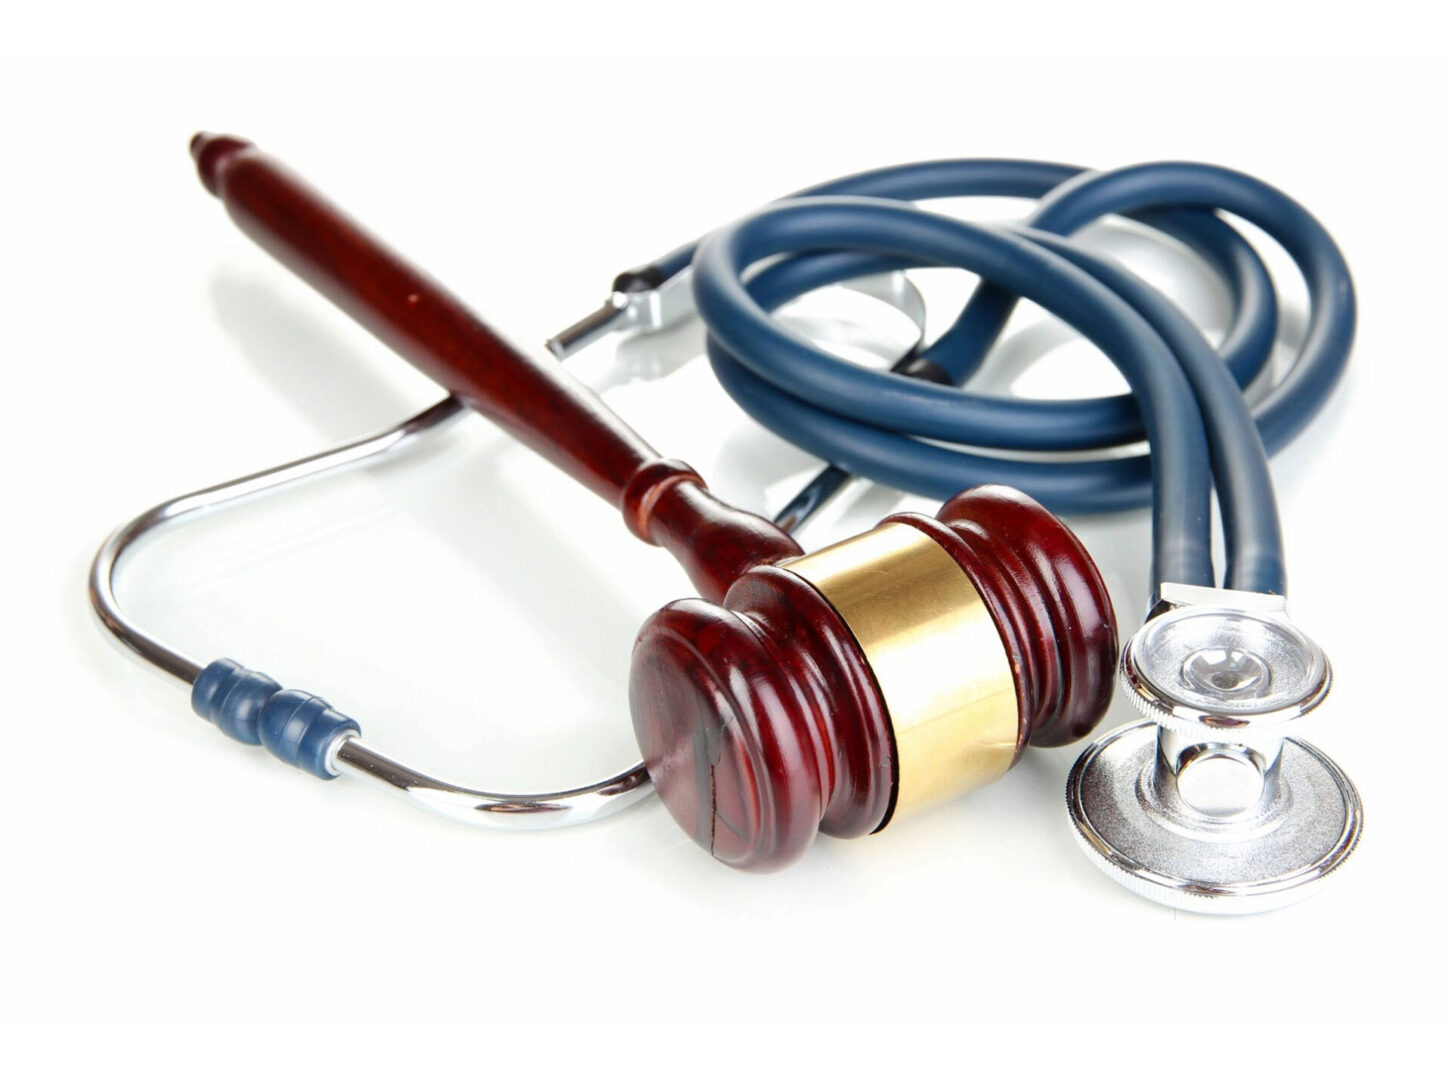 A close up picture of a hammer and a stethoscope